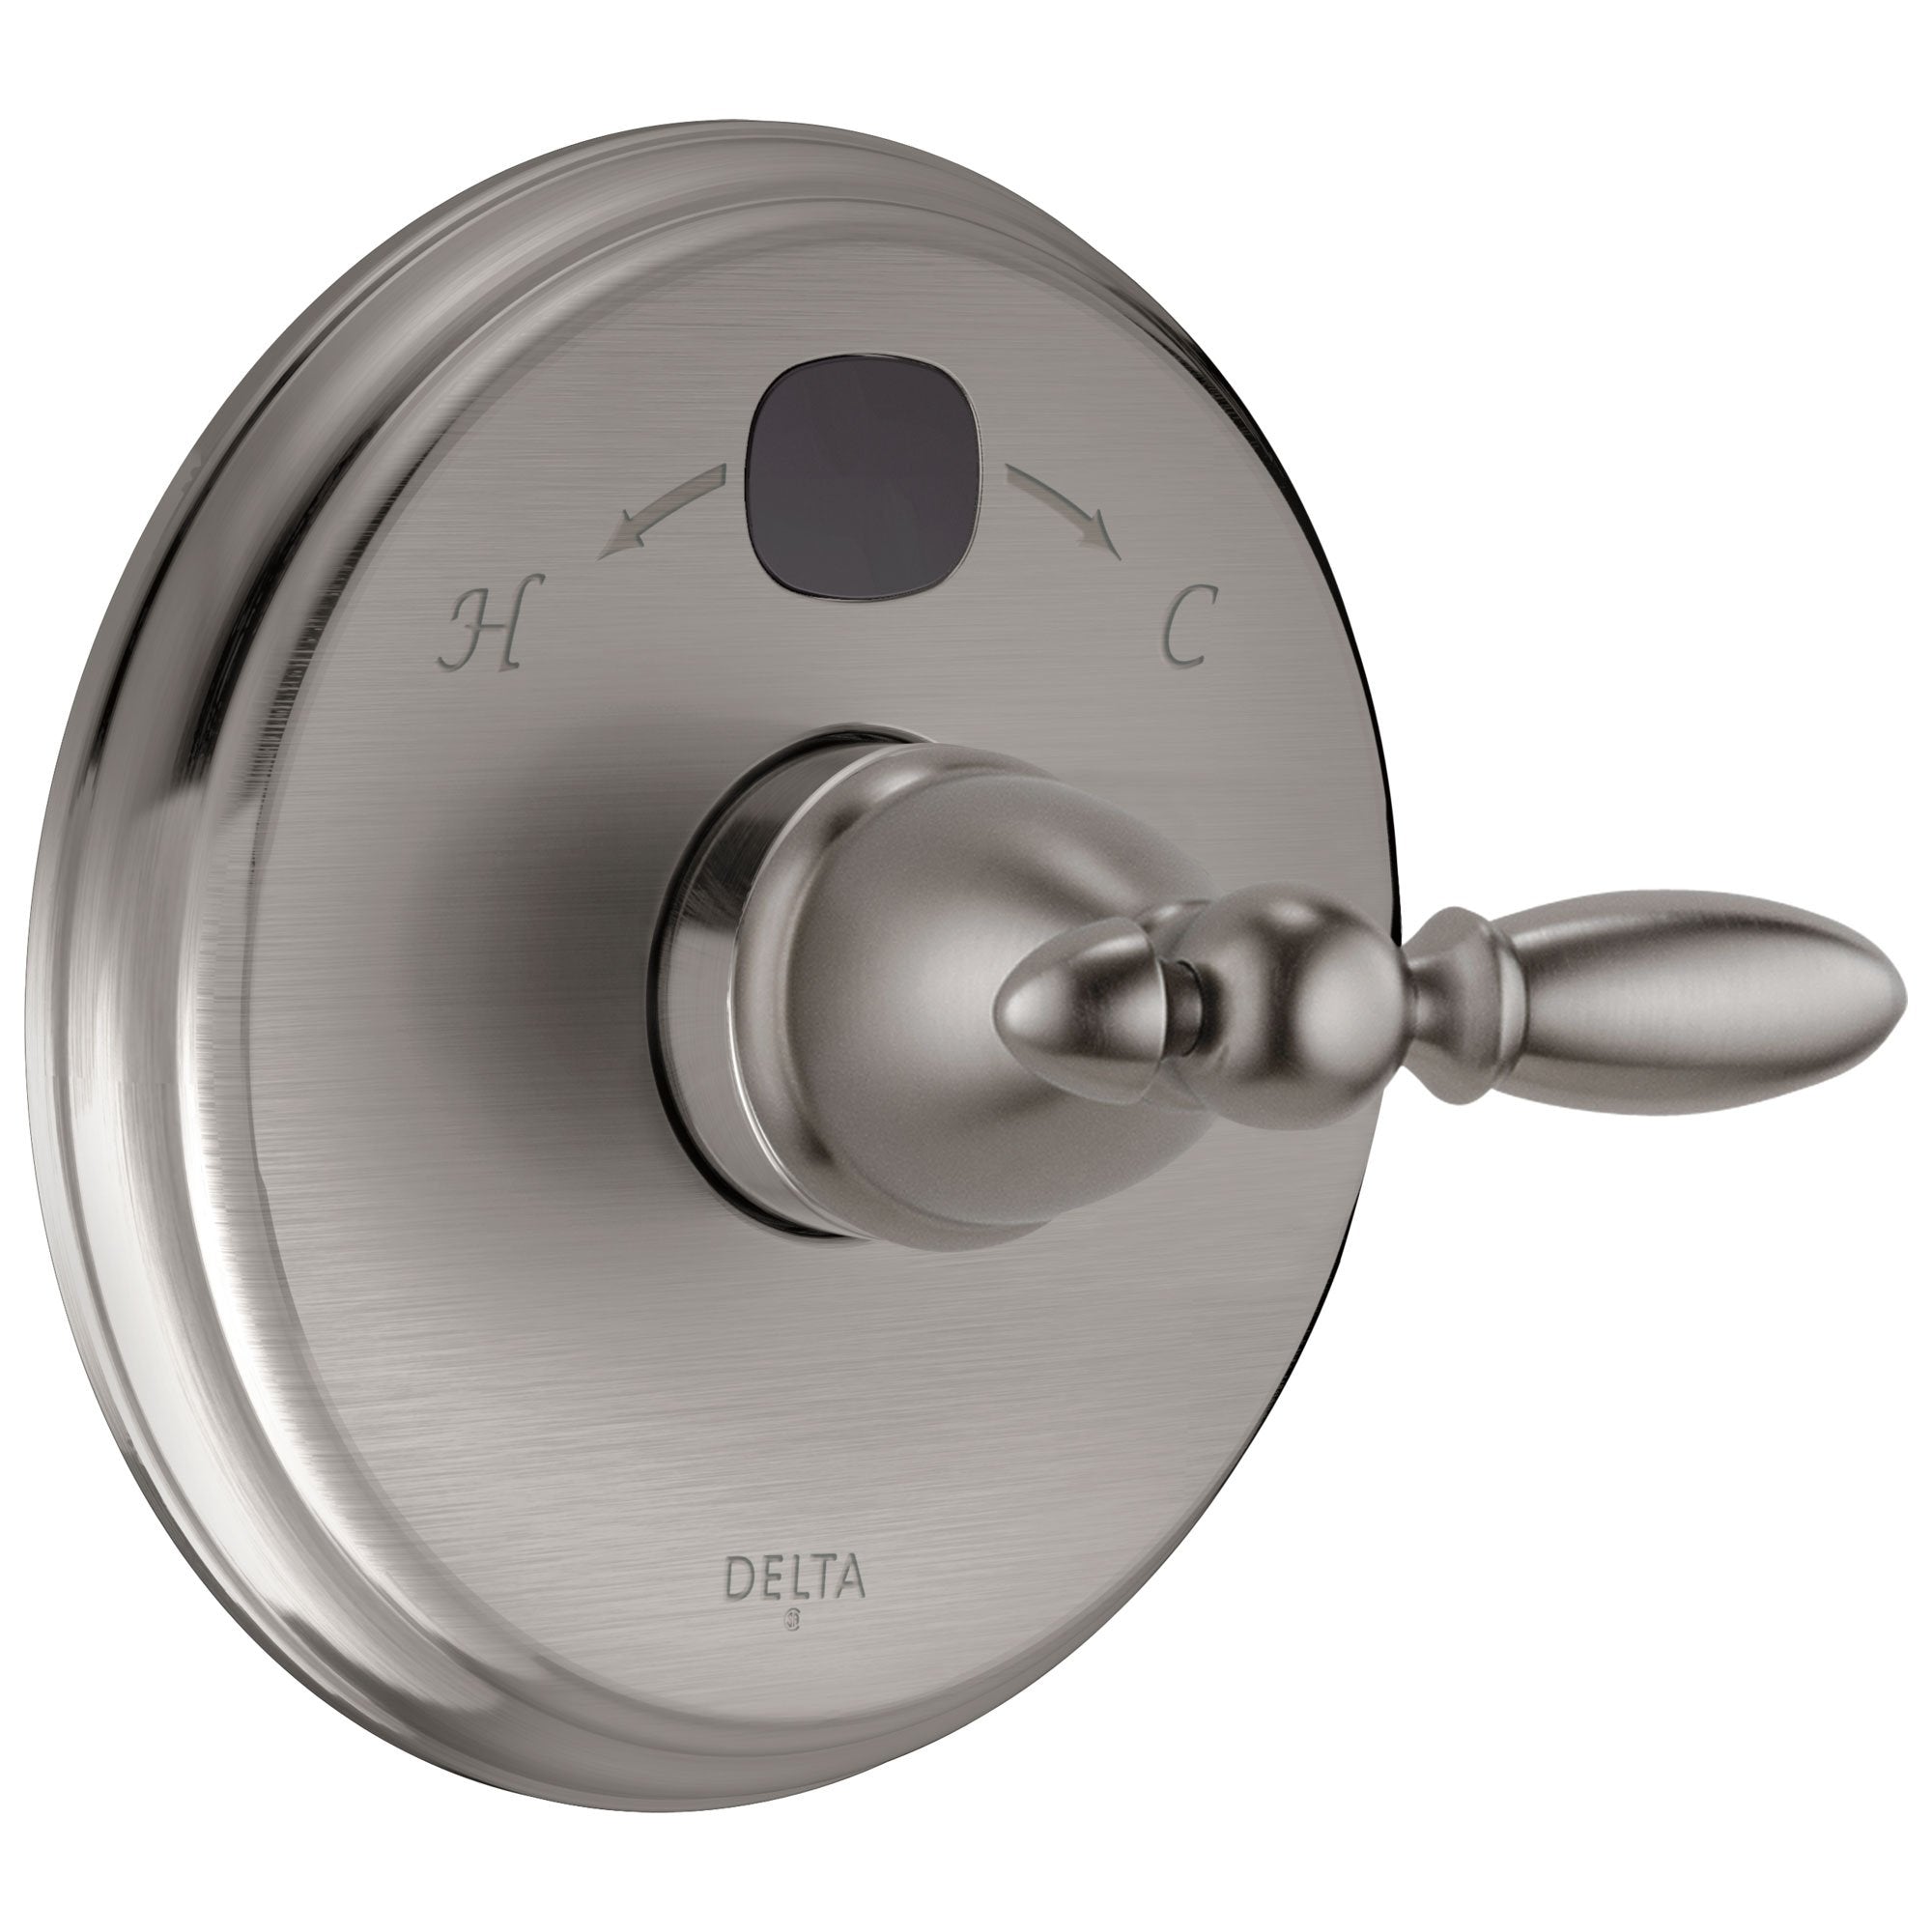 Delta Stainless Steel Finish Victorian 14 Series Digital Display Temp2O Shower Valve Control COMPLETE with Single Lever Handle and Valve with Stops D1665V